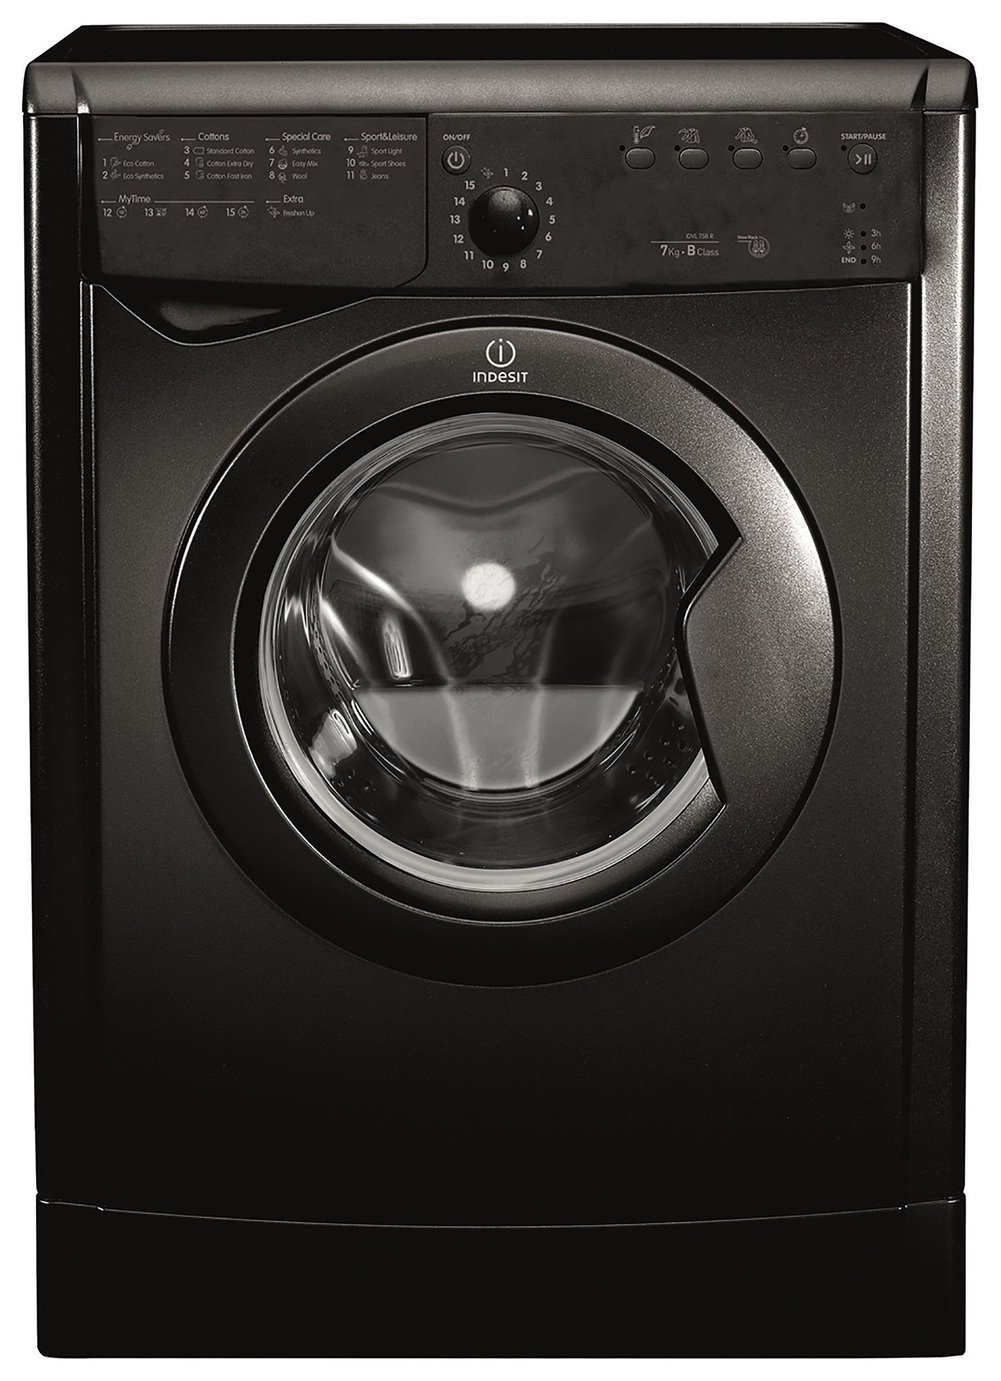 Indesit Ecotime IDVL75BRK.9 7KG Vented Tumble Dryer review